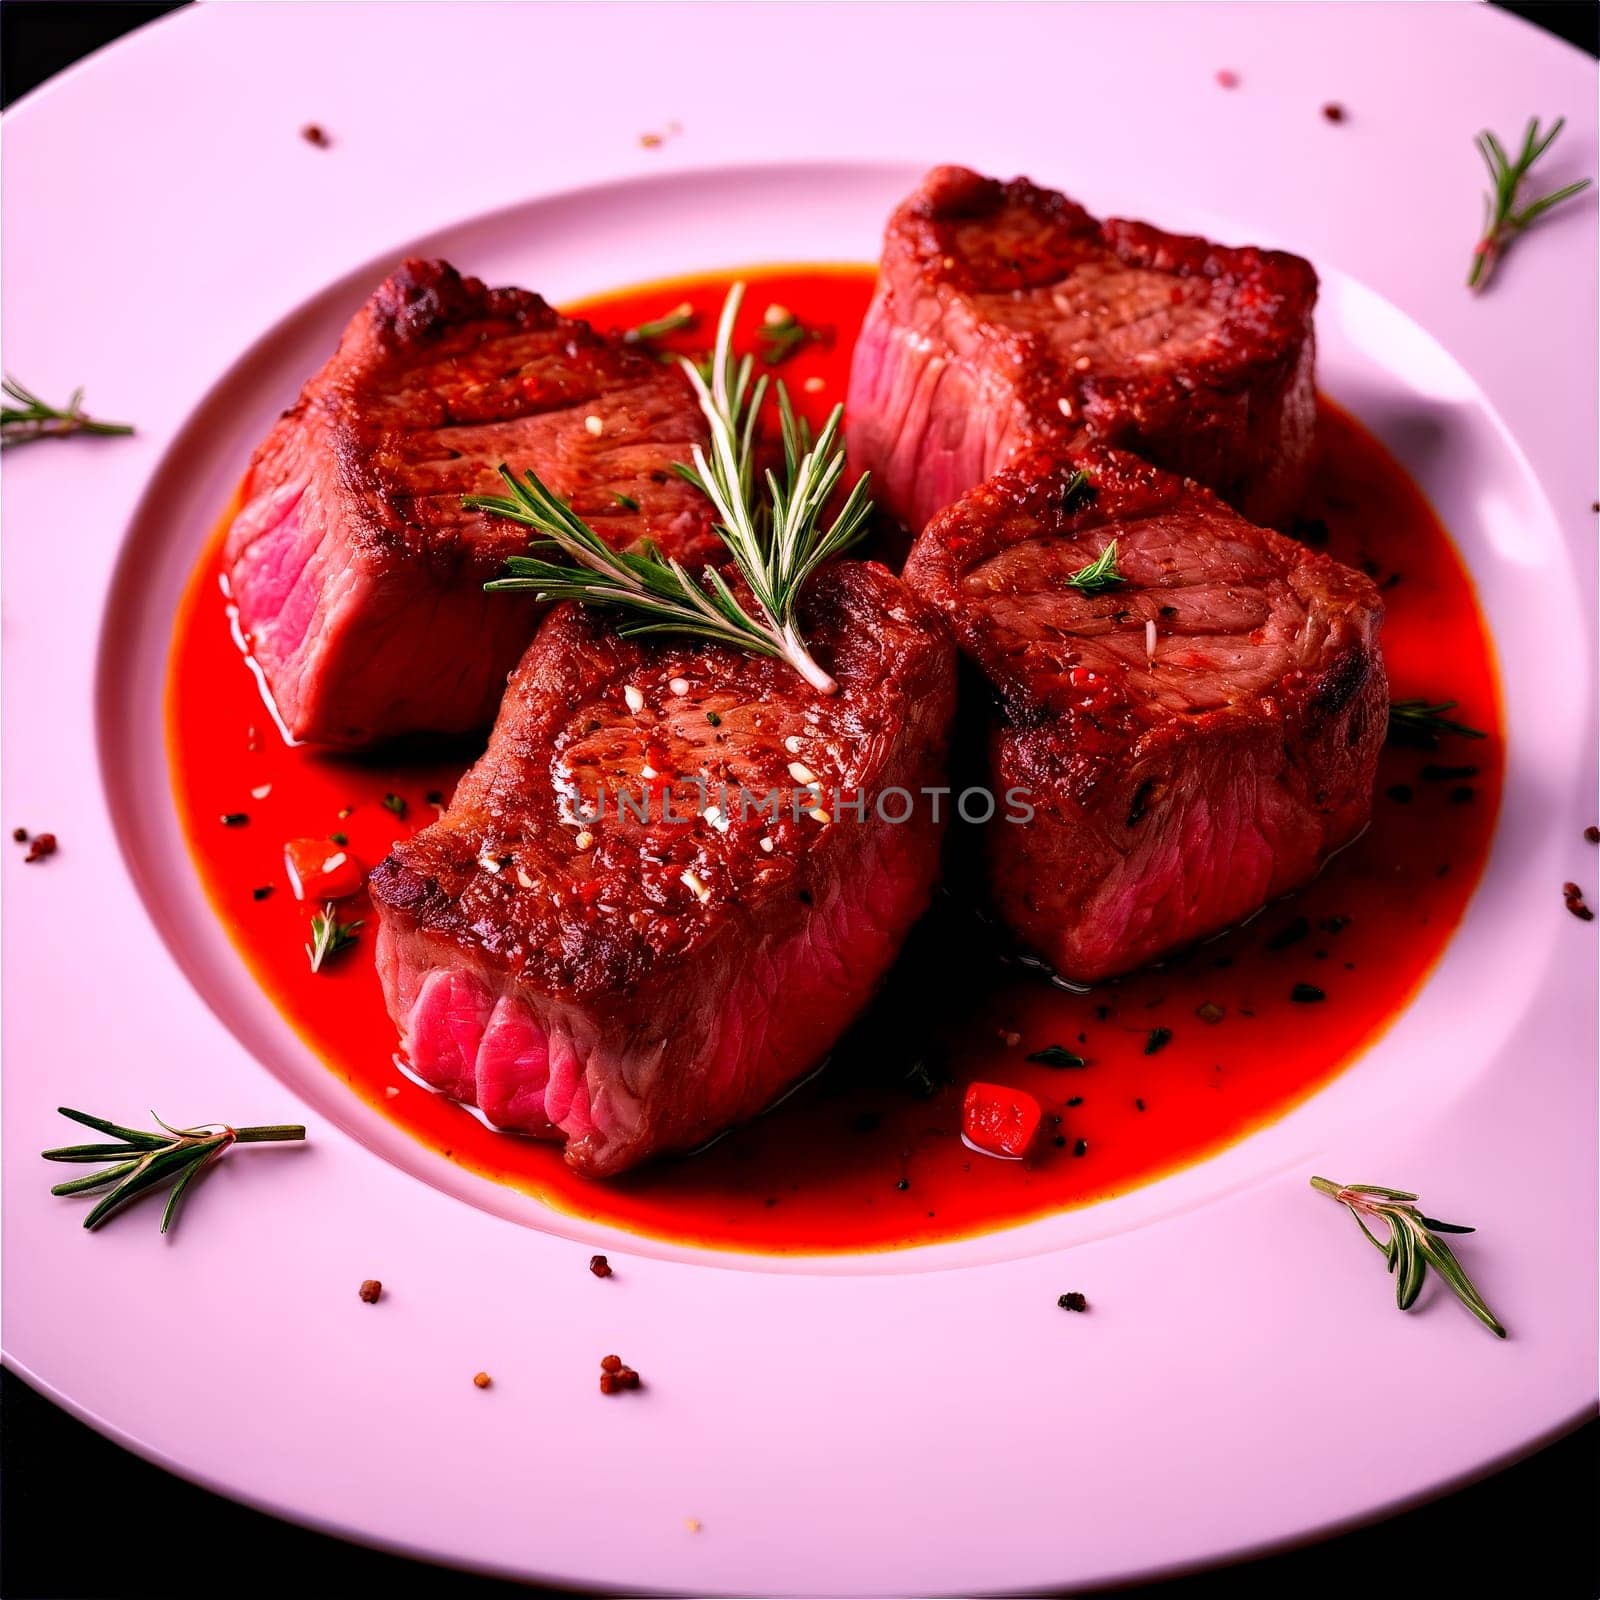 Lamb loin chops delicate and tender with garlic and rosemary needles exploding in a Mediterrane by panophotograph